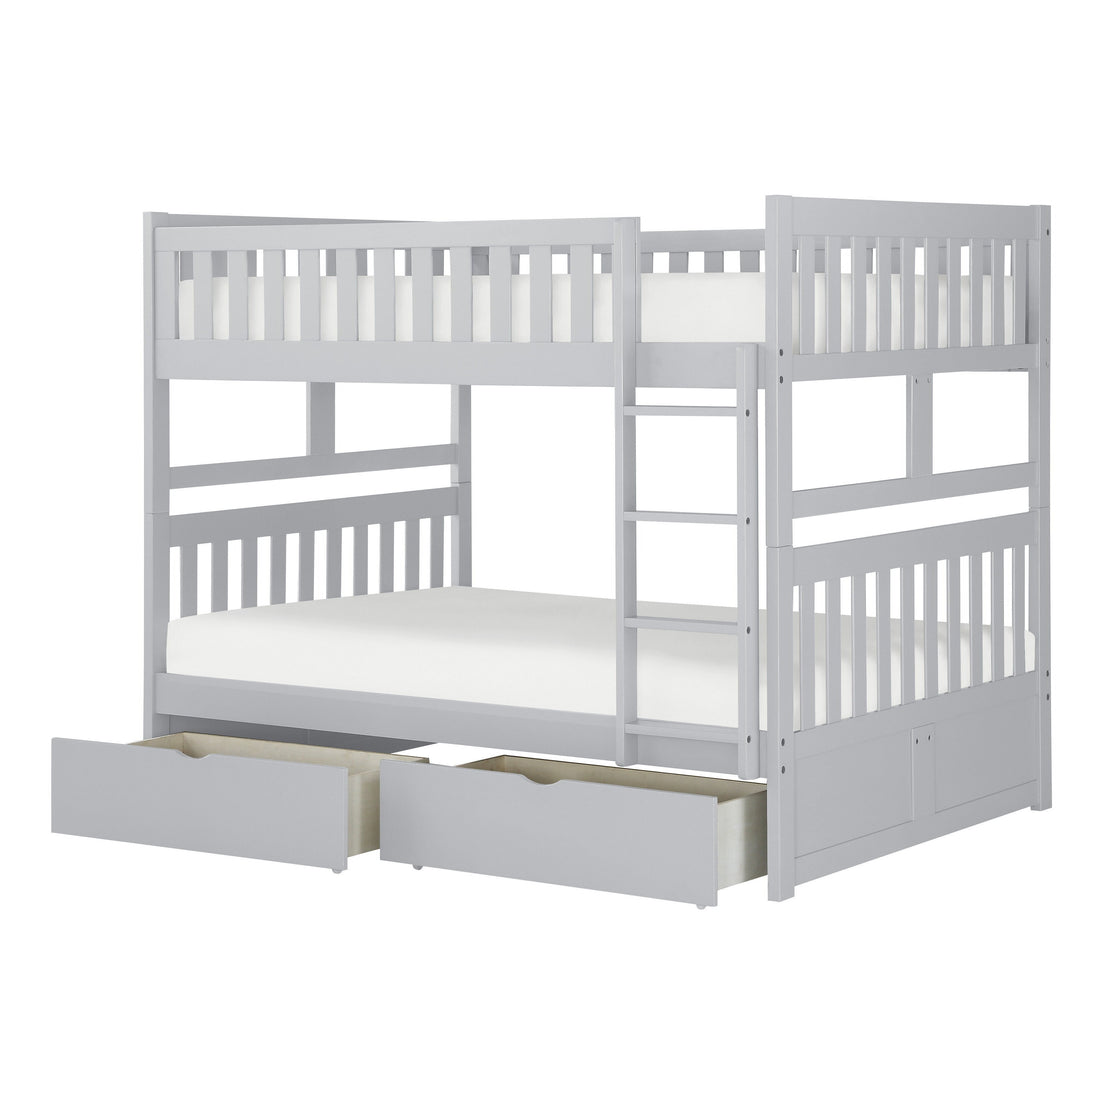 Orion Gray Full/Full Bunk Bed with Storage Boxes - SET | B2063FF-1 | B2063FF-2 | B2063FF-SL | B2063-T - Bien Home Furniture &amp; Electronics